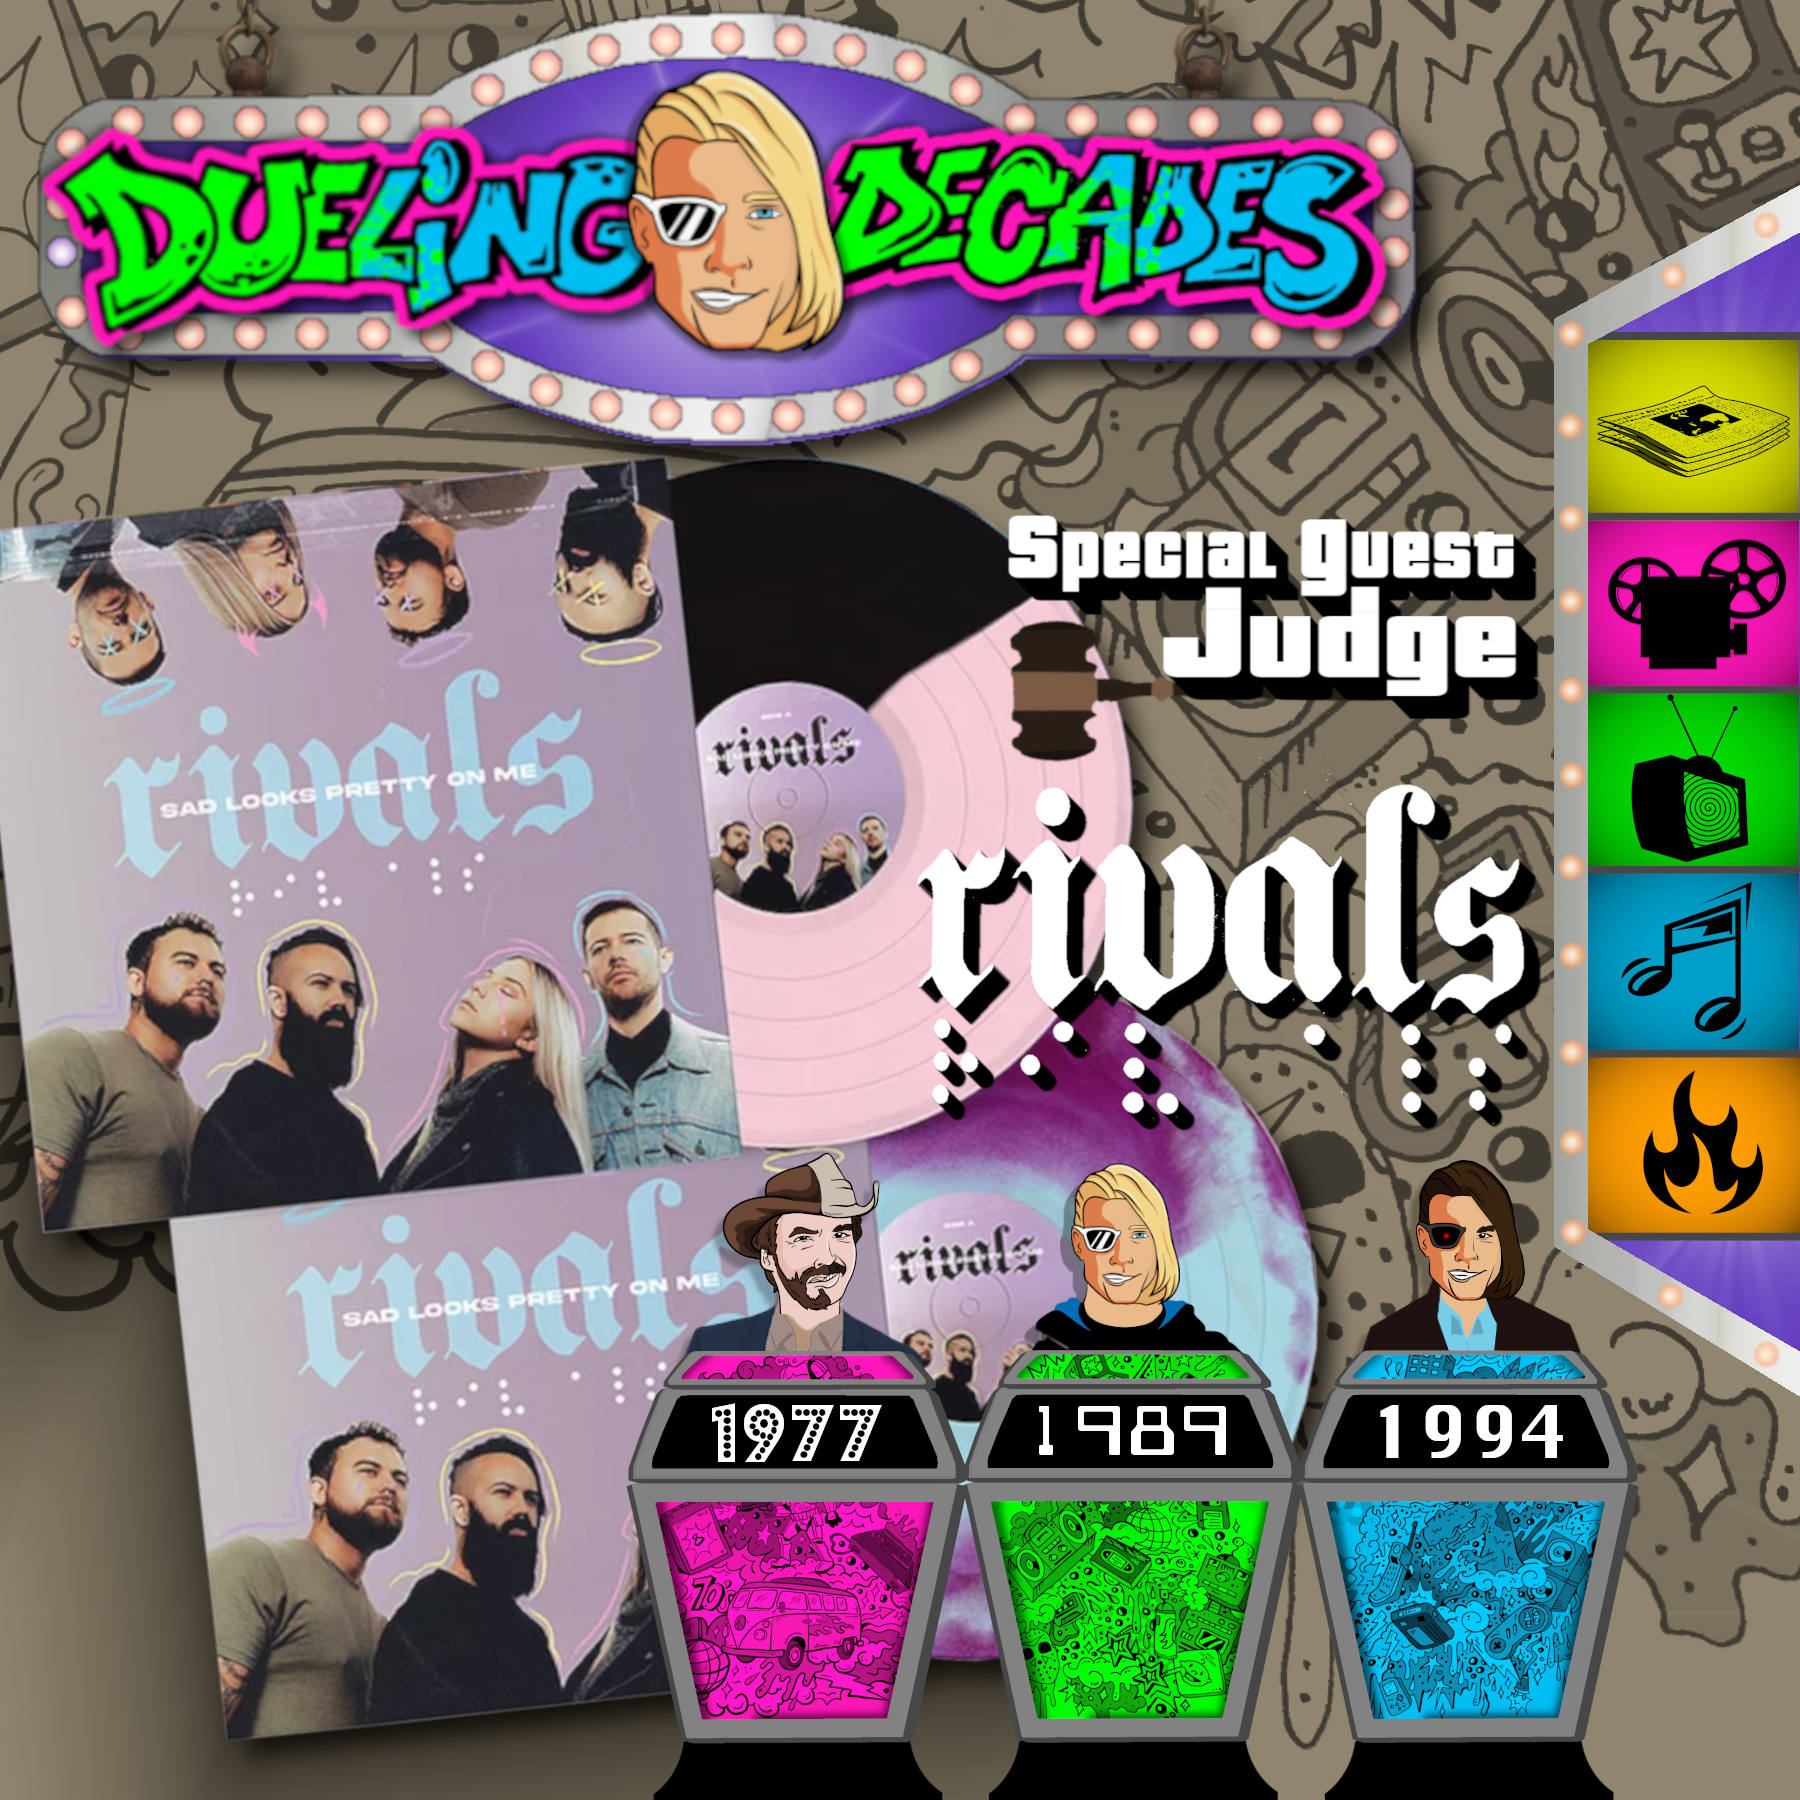 Sad looks pretty on the band Rivals as they rule who had the best week 1977, 1989, or 1994!